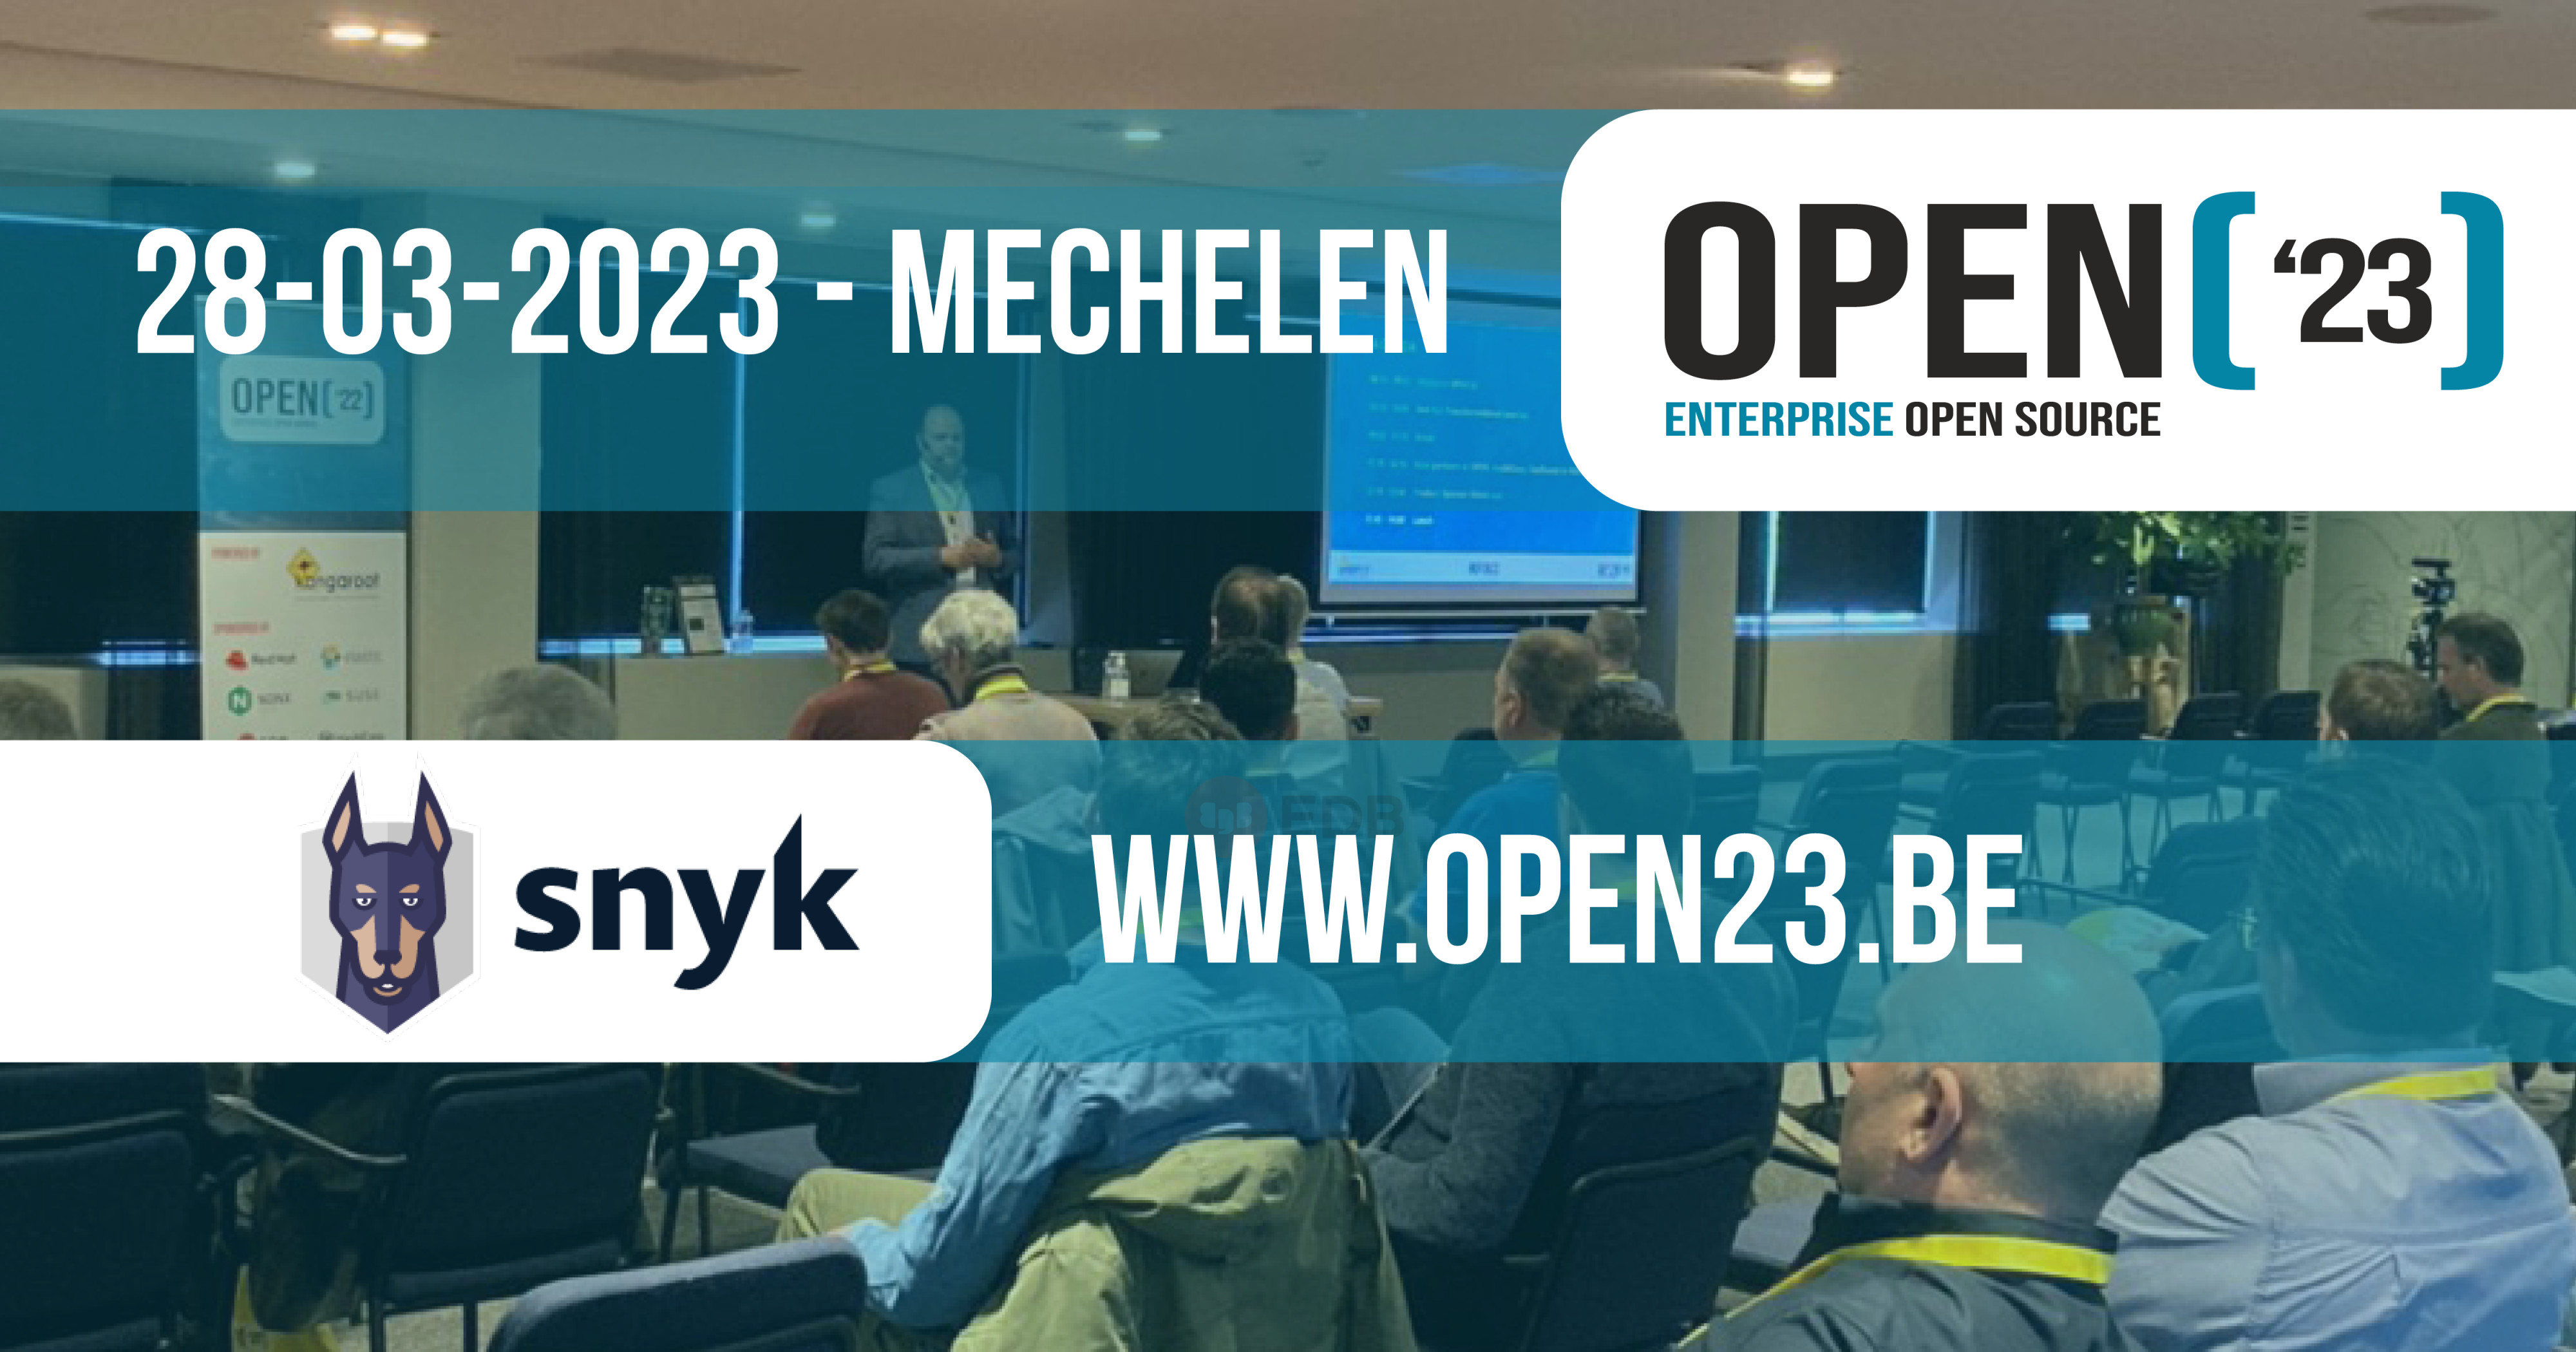 Join us at OPEN'23